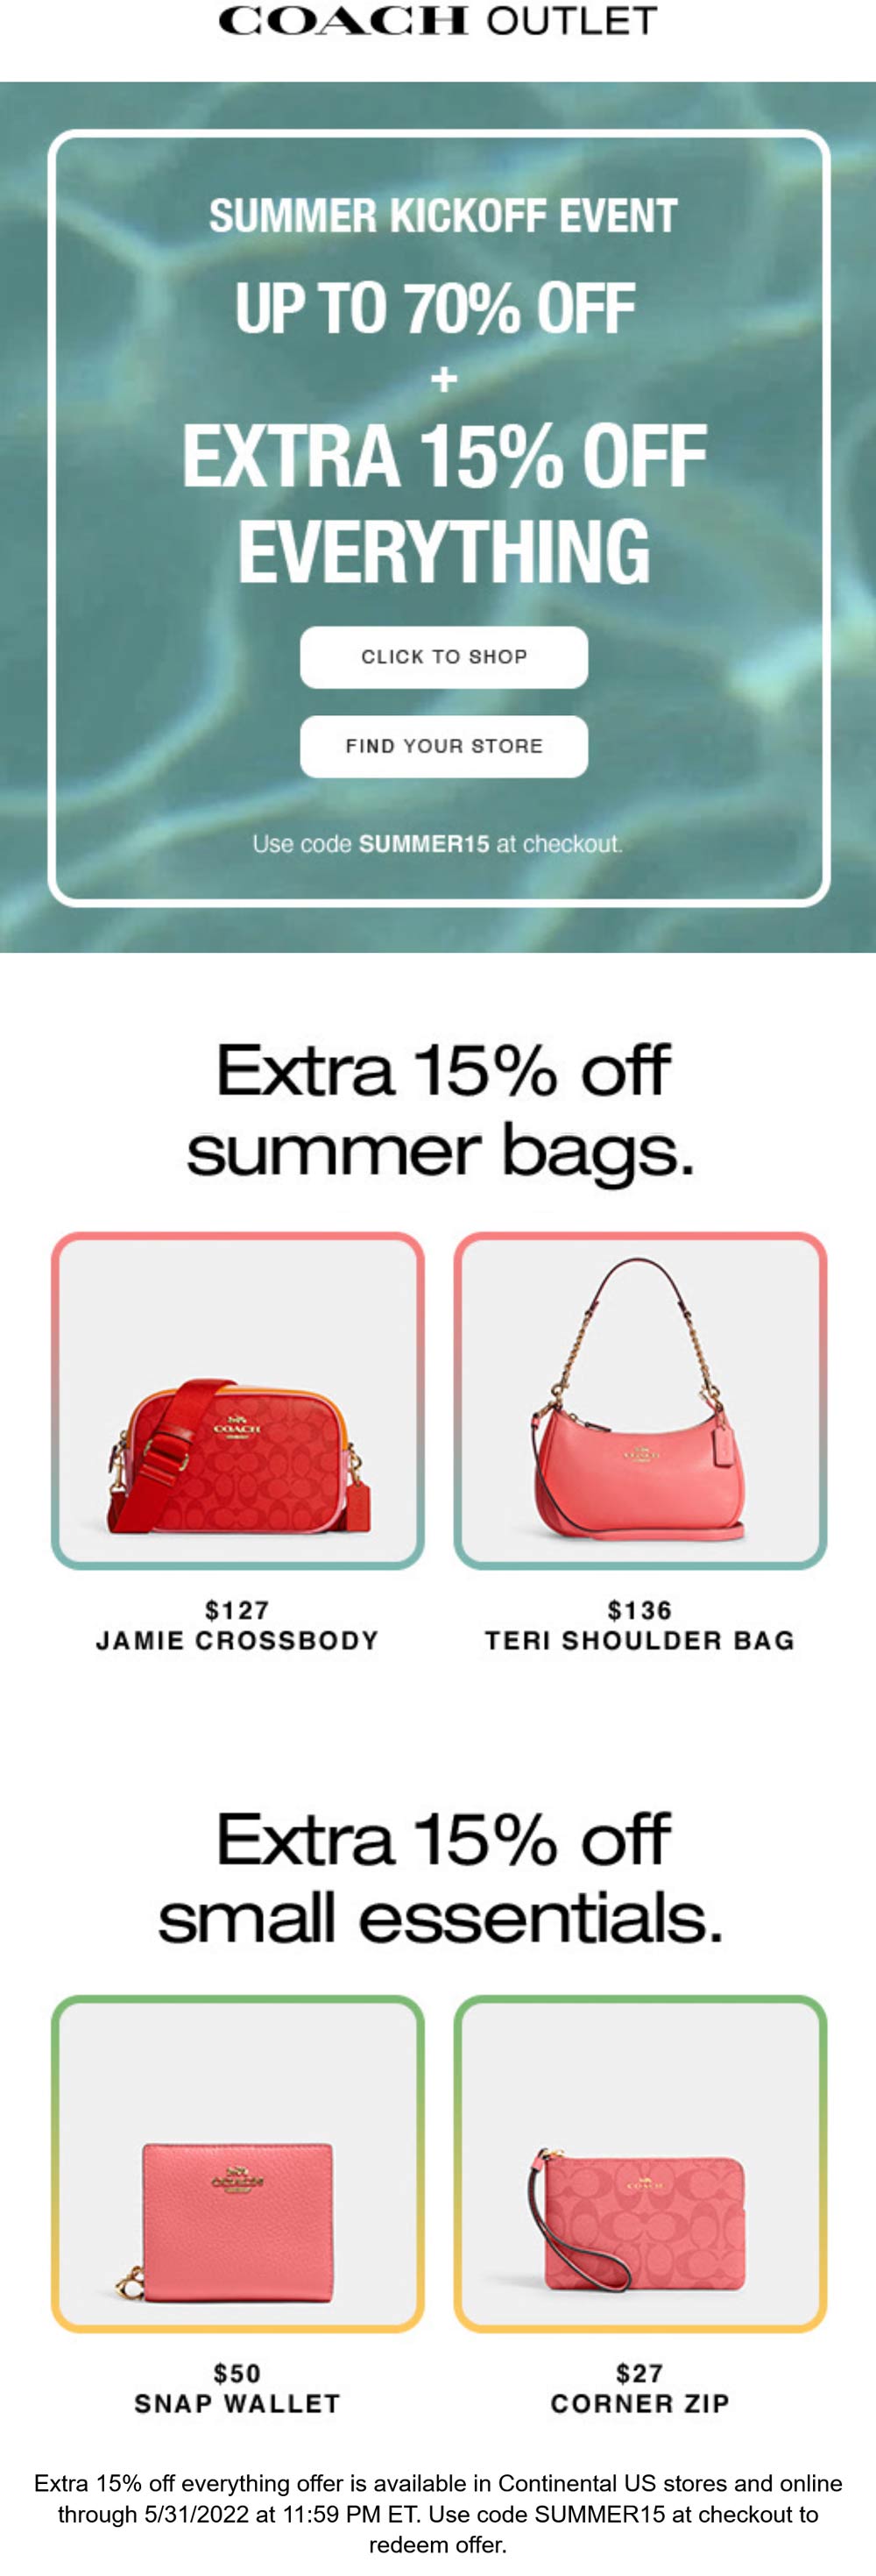 Coach Outlet stores Coupon  Extra 15% off everything at Coach Outlet, or online via promo code SUMMER15 #coachoutlet 